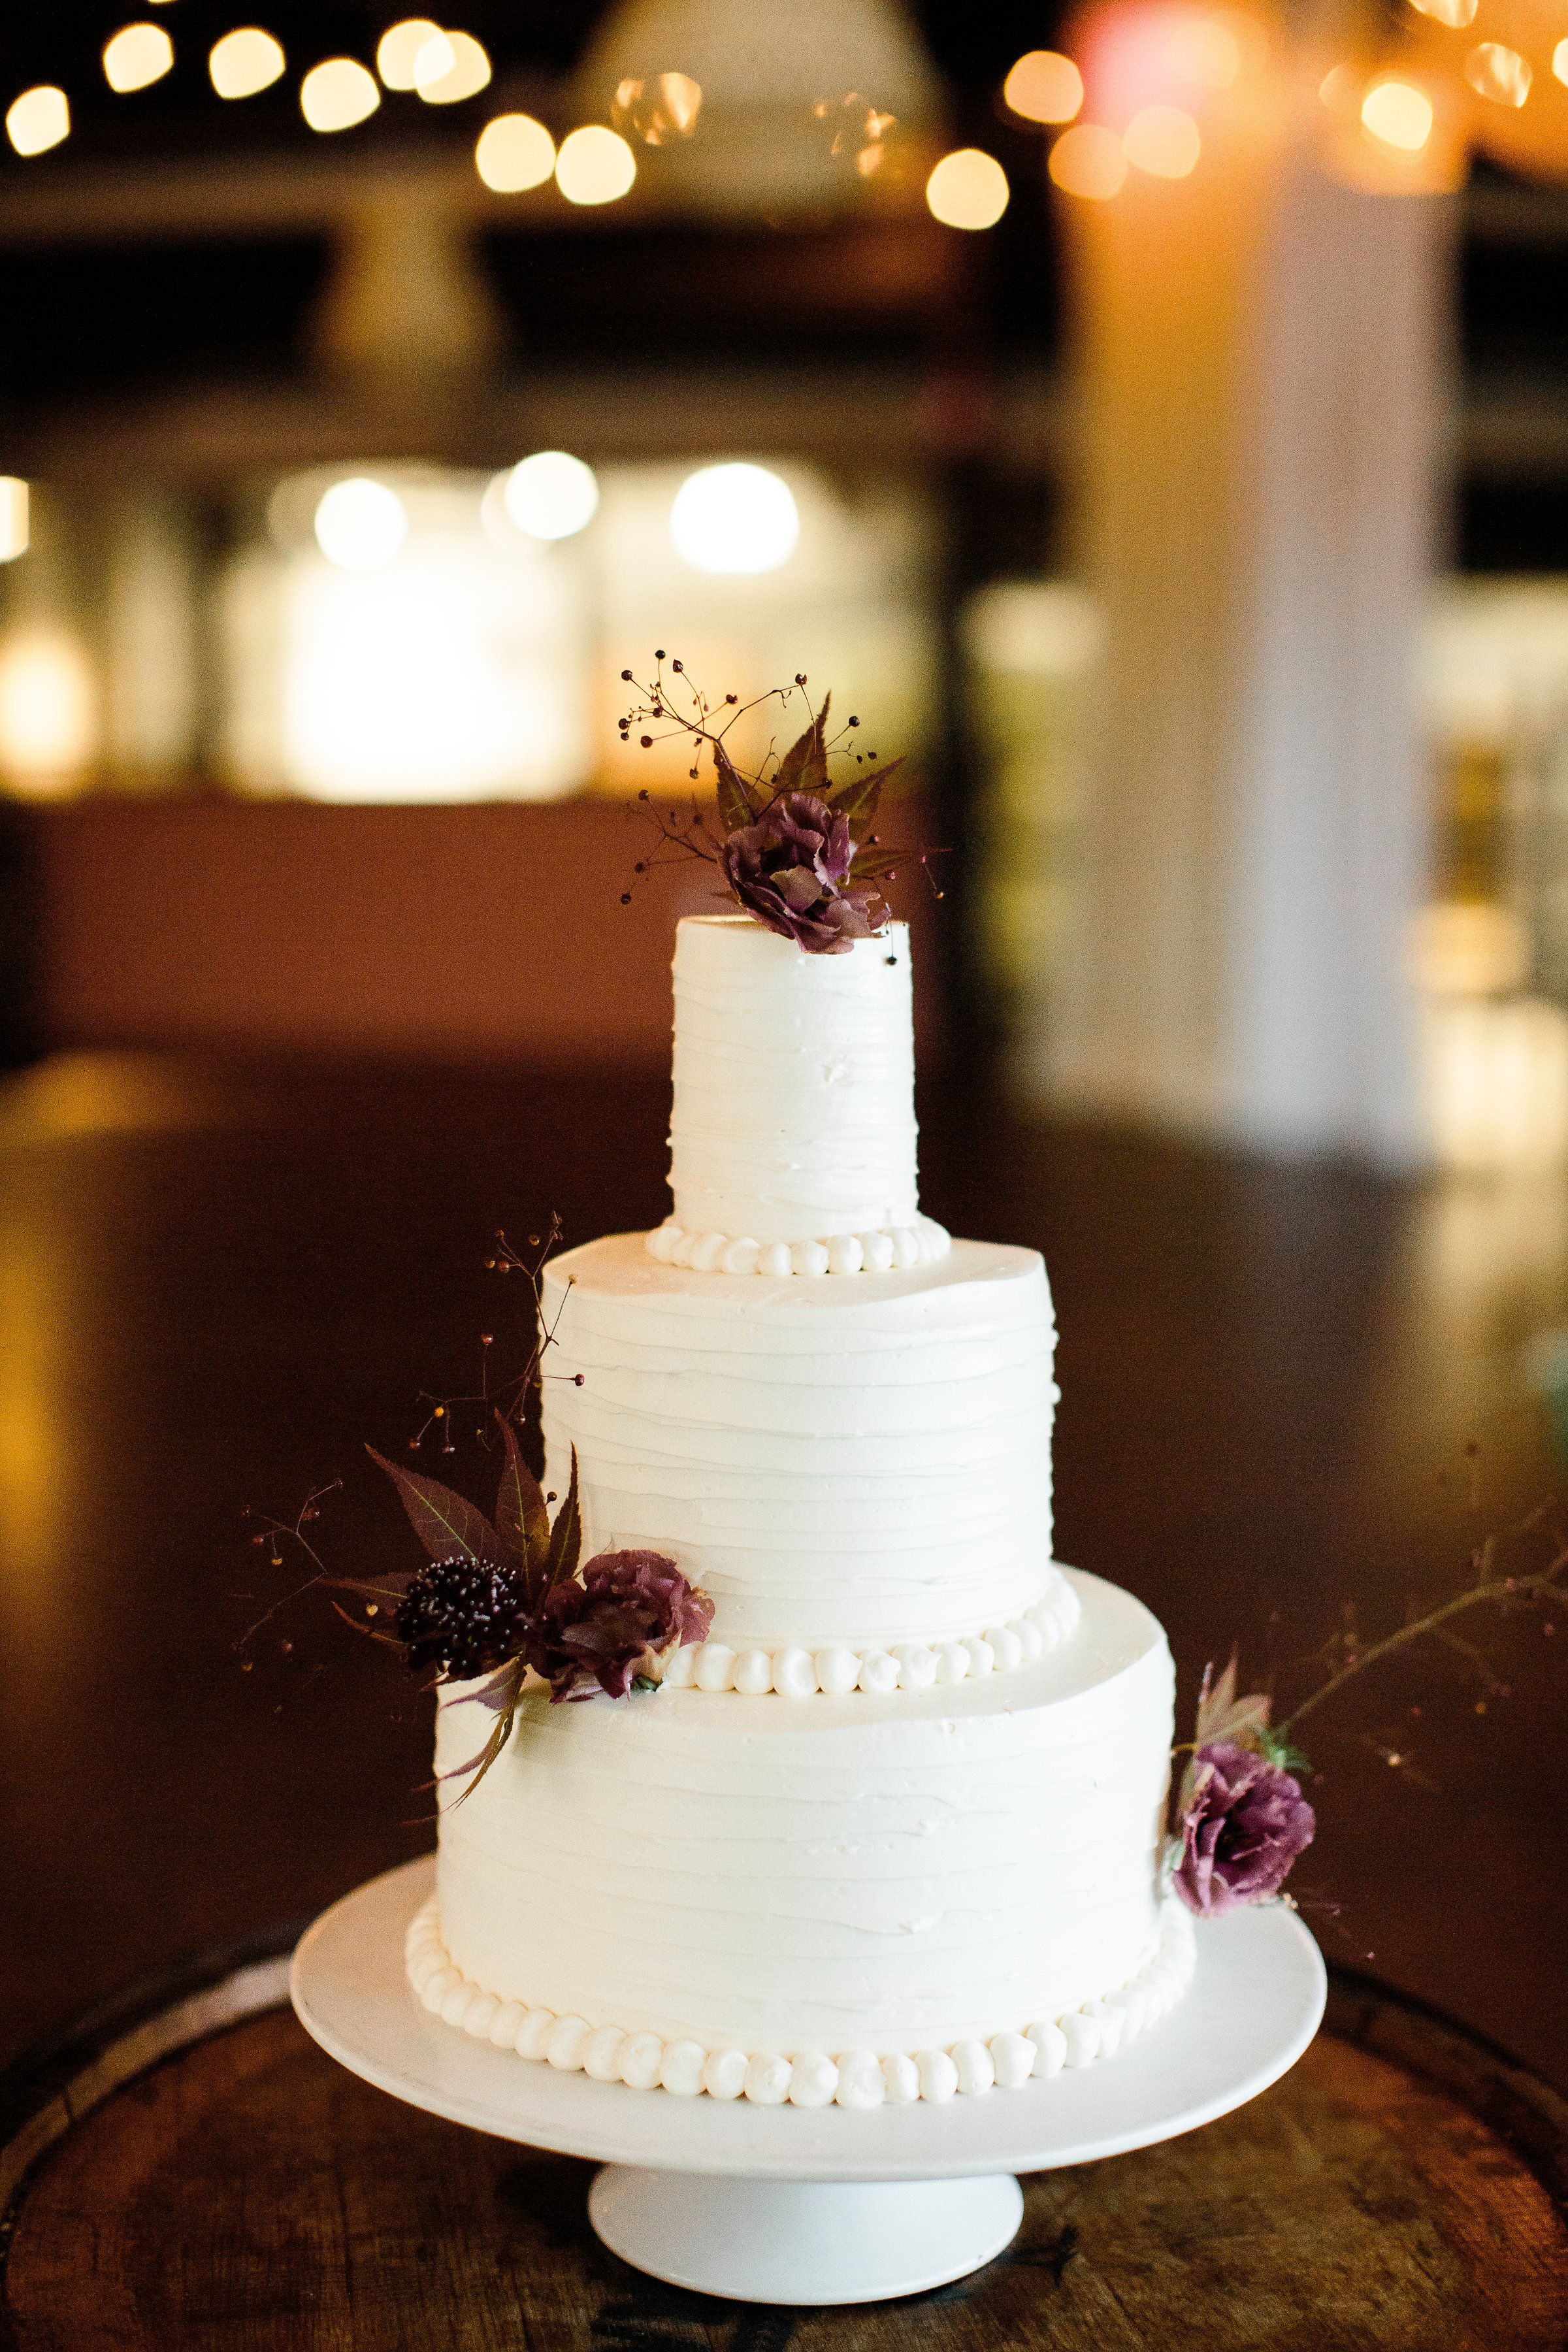 Three tiered (top tier small) white cake from LaCuisine - Pearl Weddings & Events